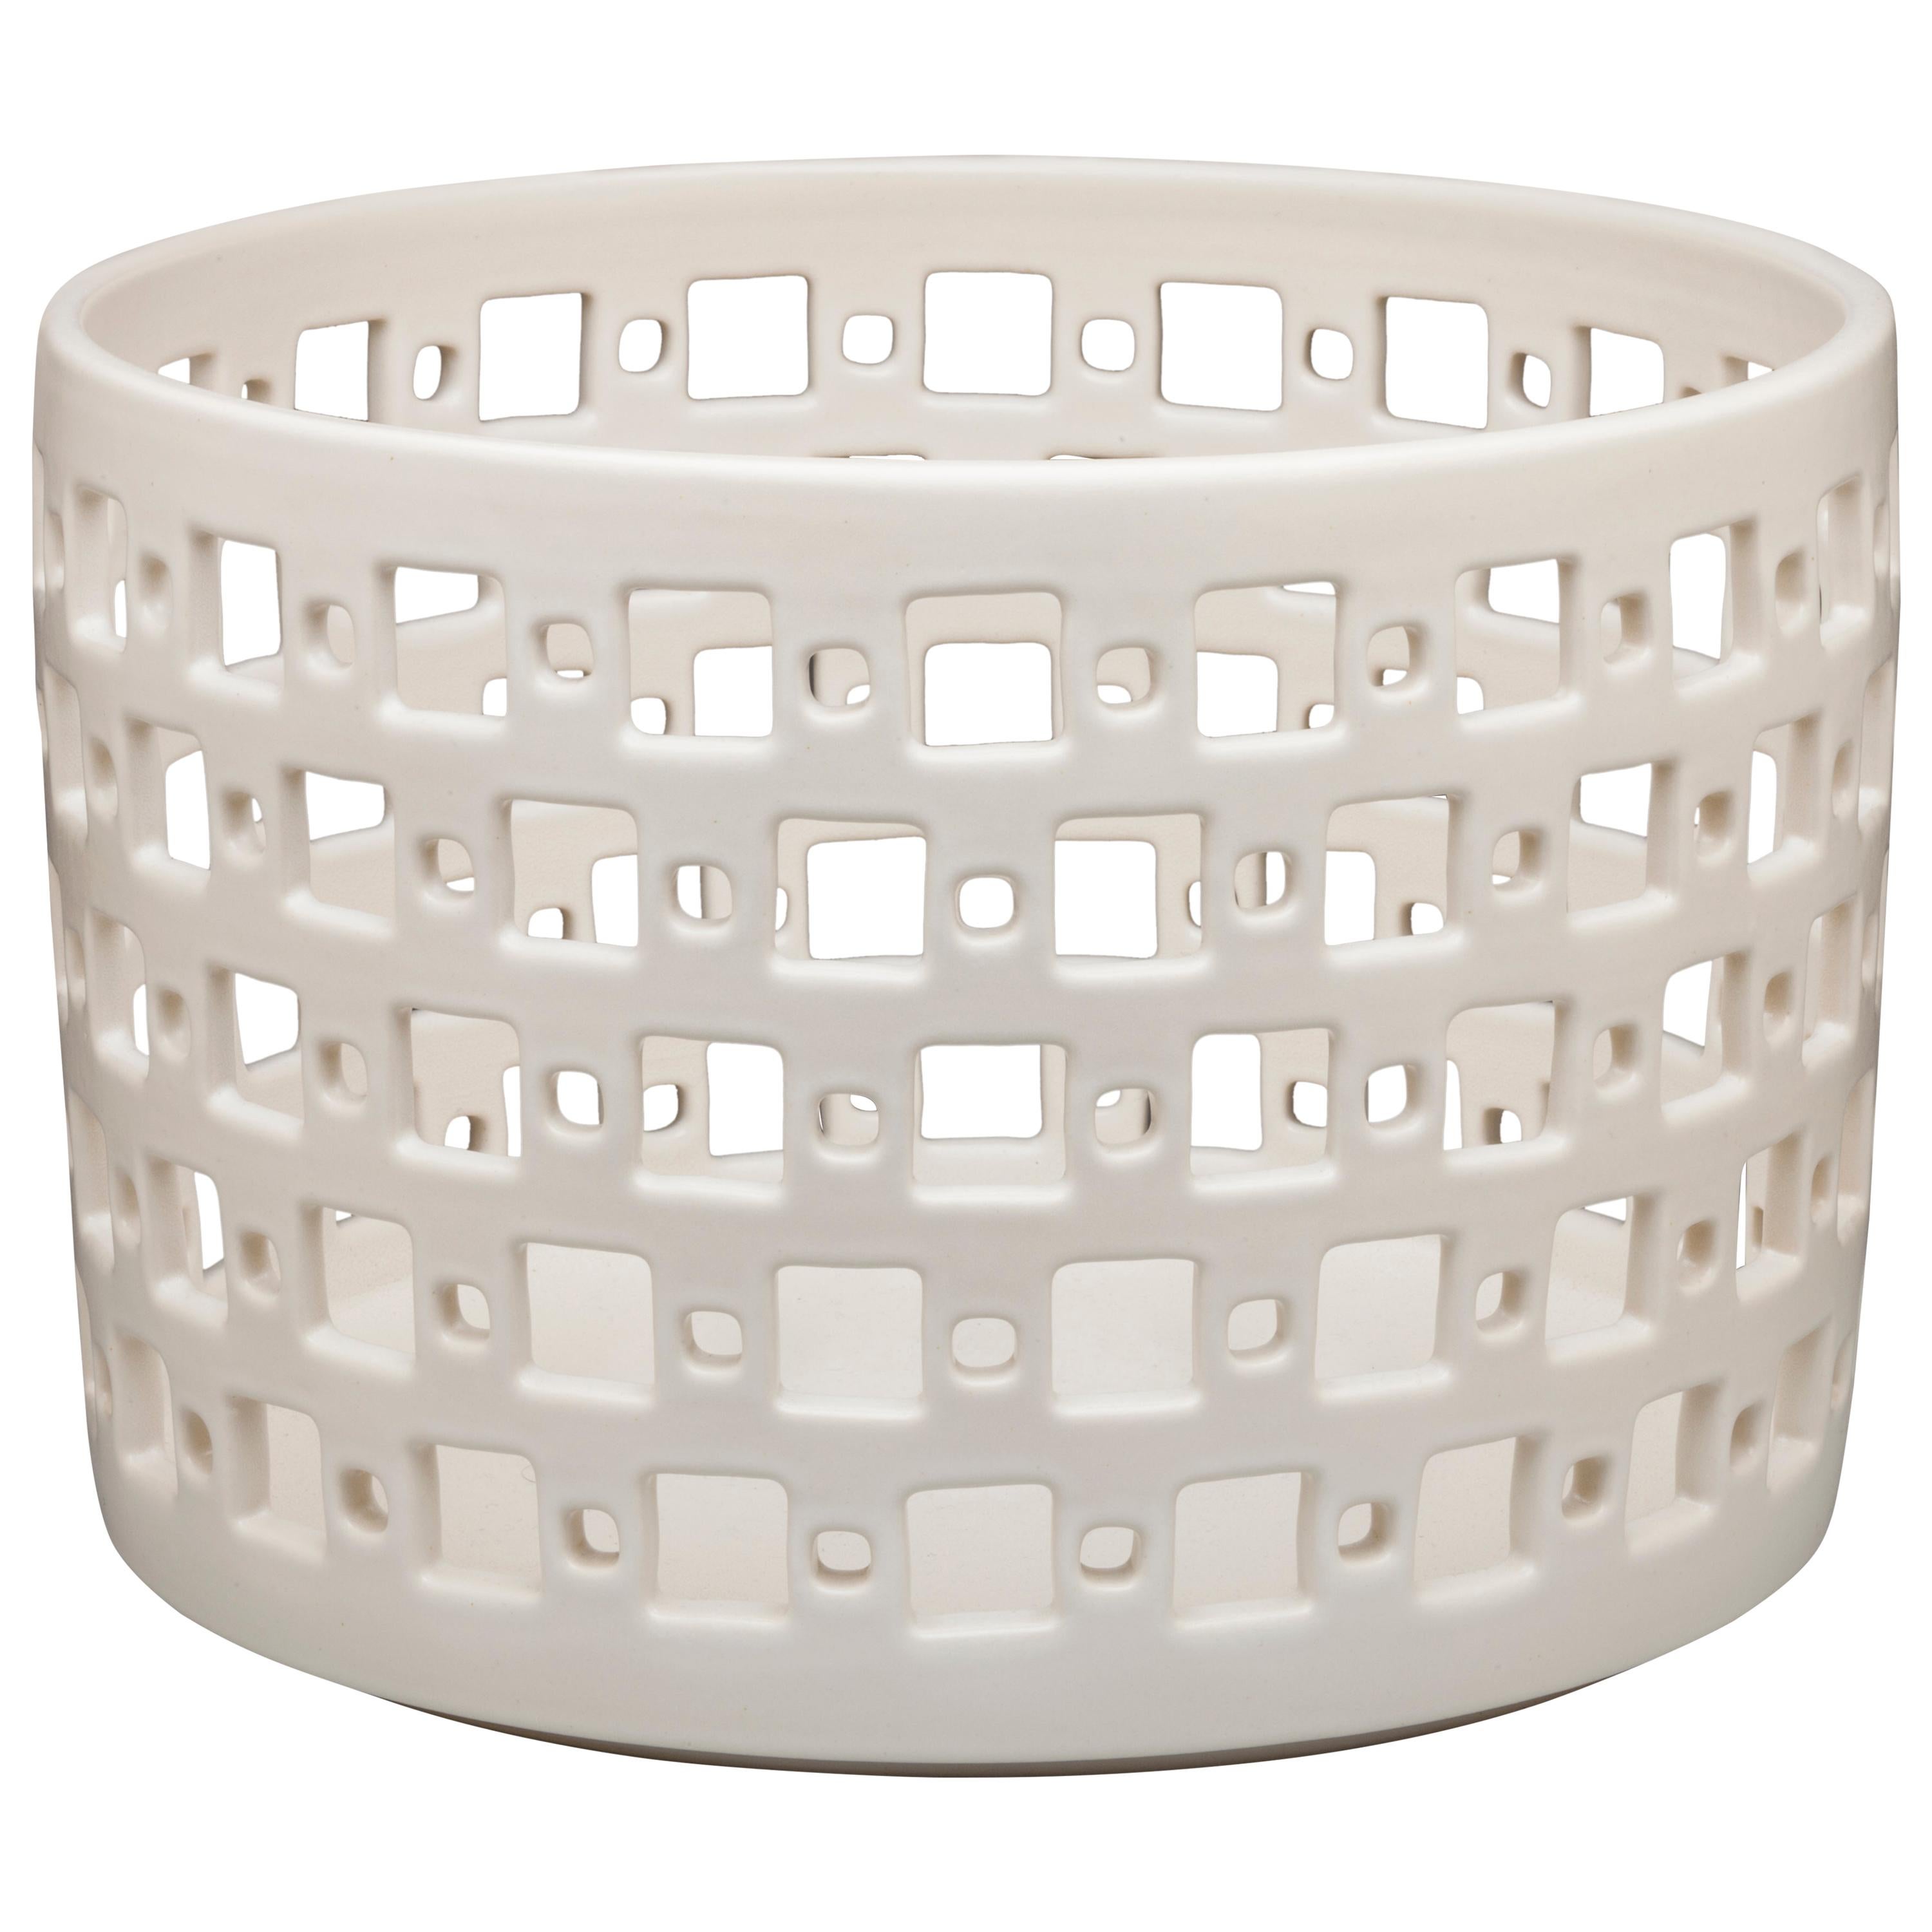 White Ceramic Square Pierced Cylindrical Bowl or Vessel, In Stock